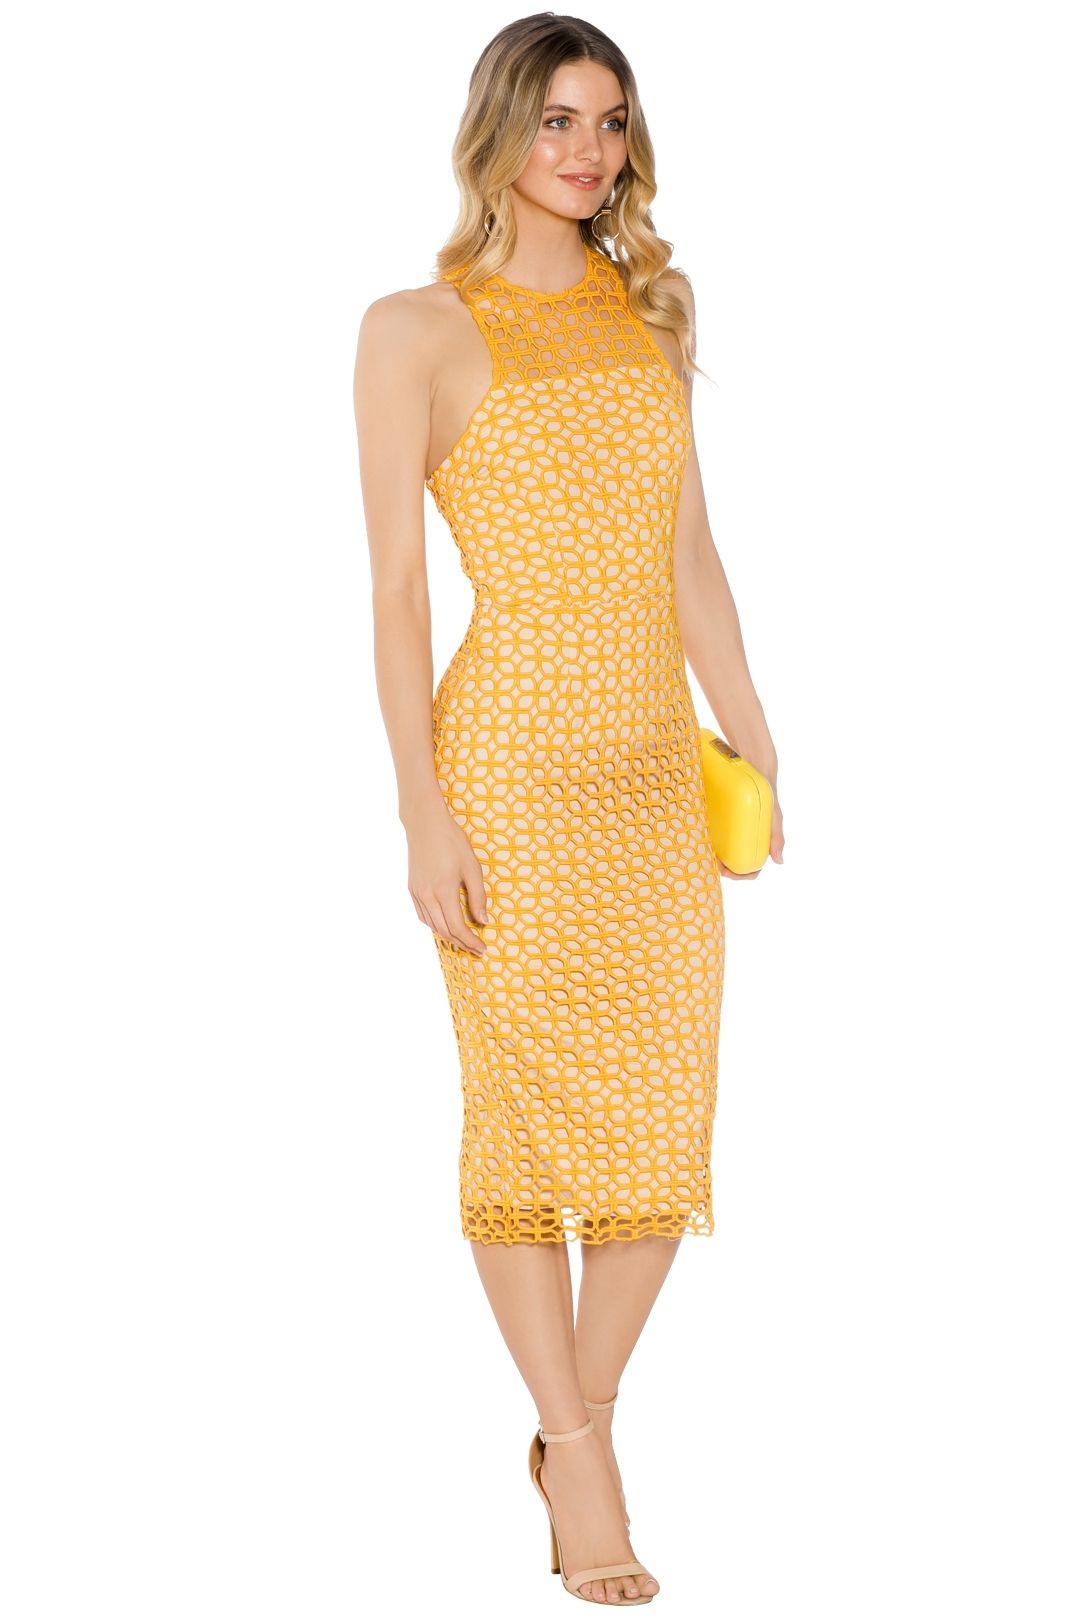 Cooper St - Karlie High Neck Lace Dress - Yellow - Side